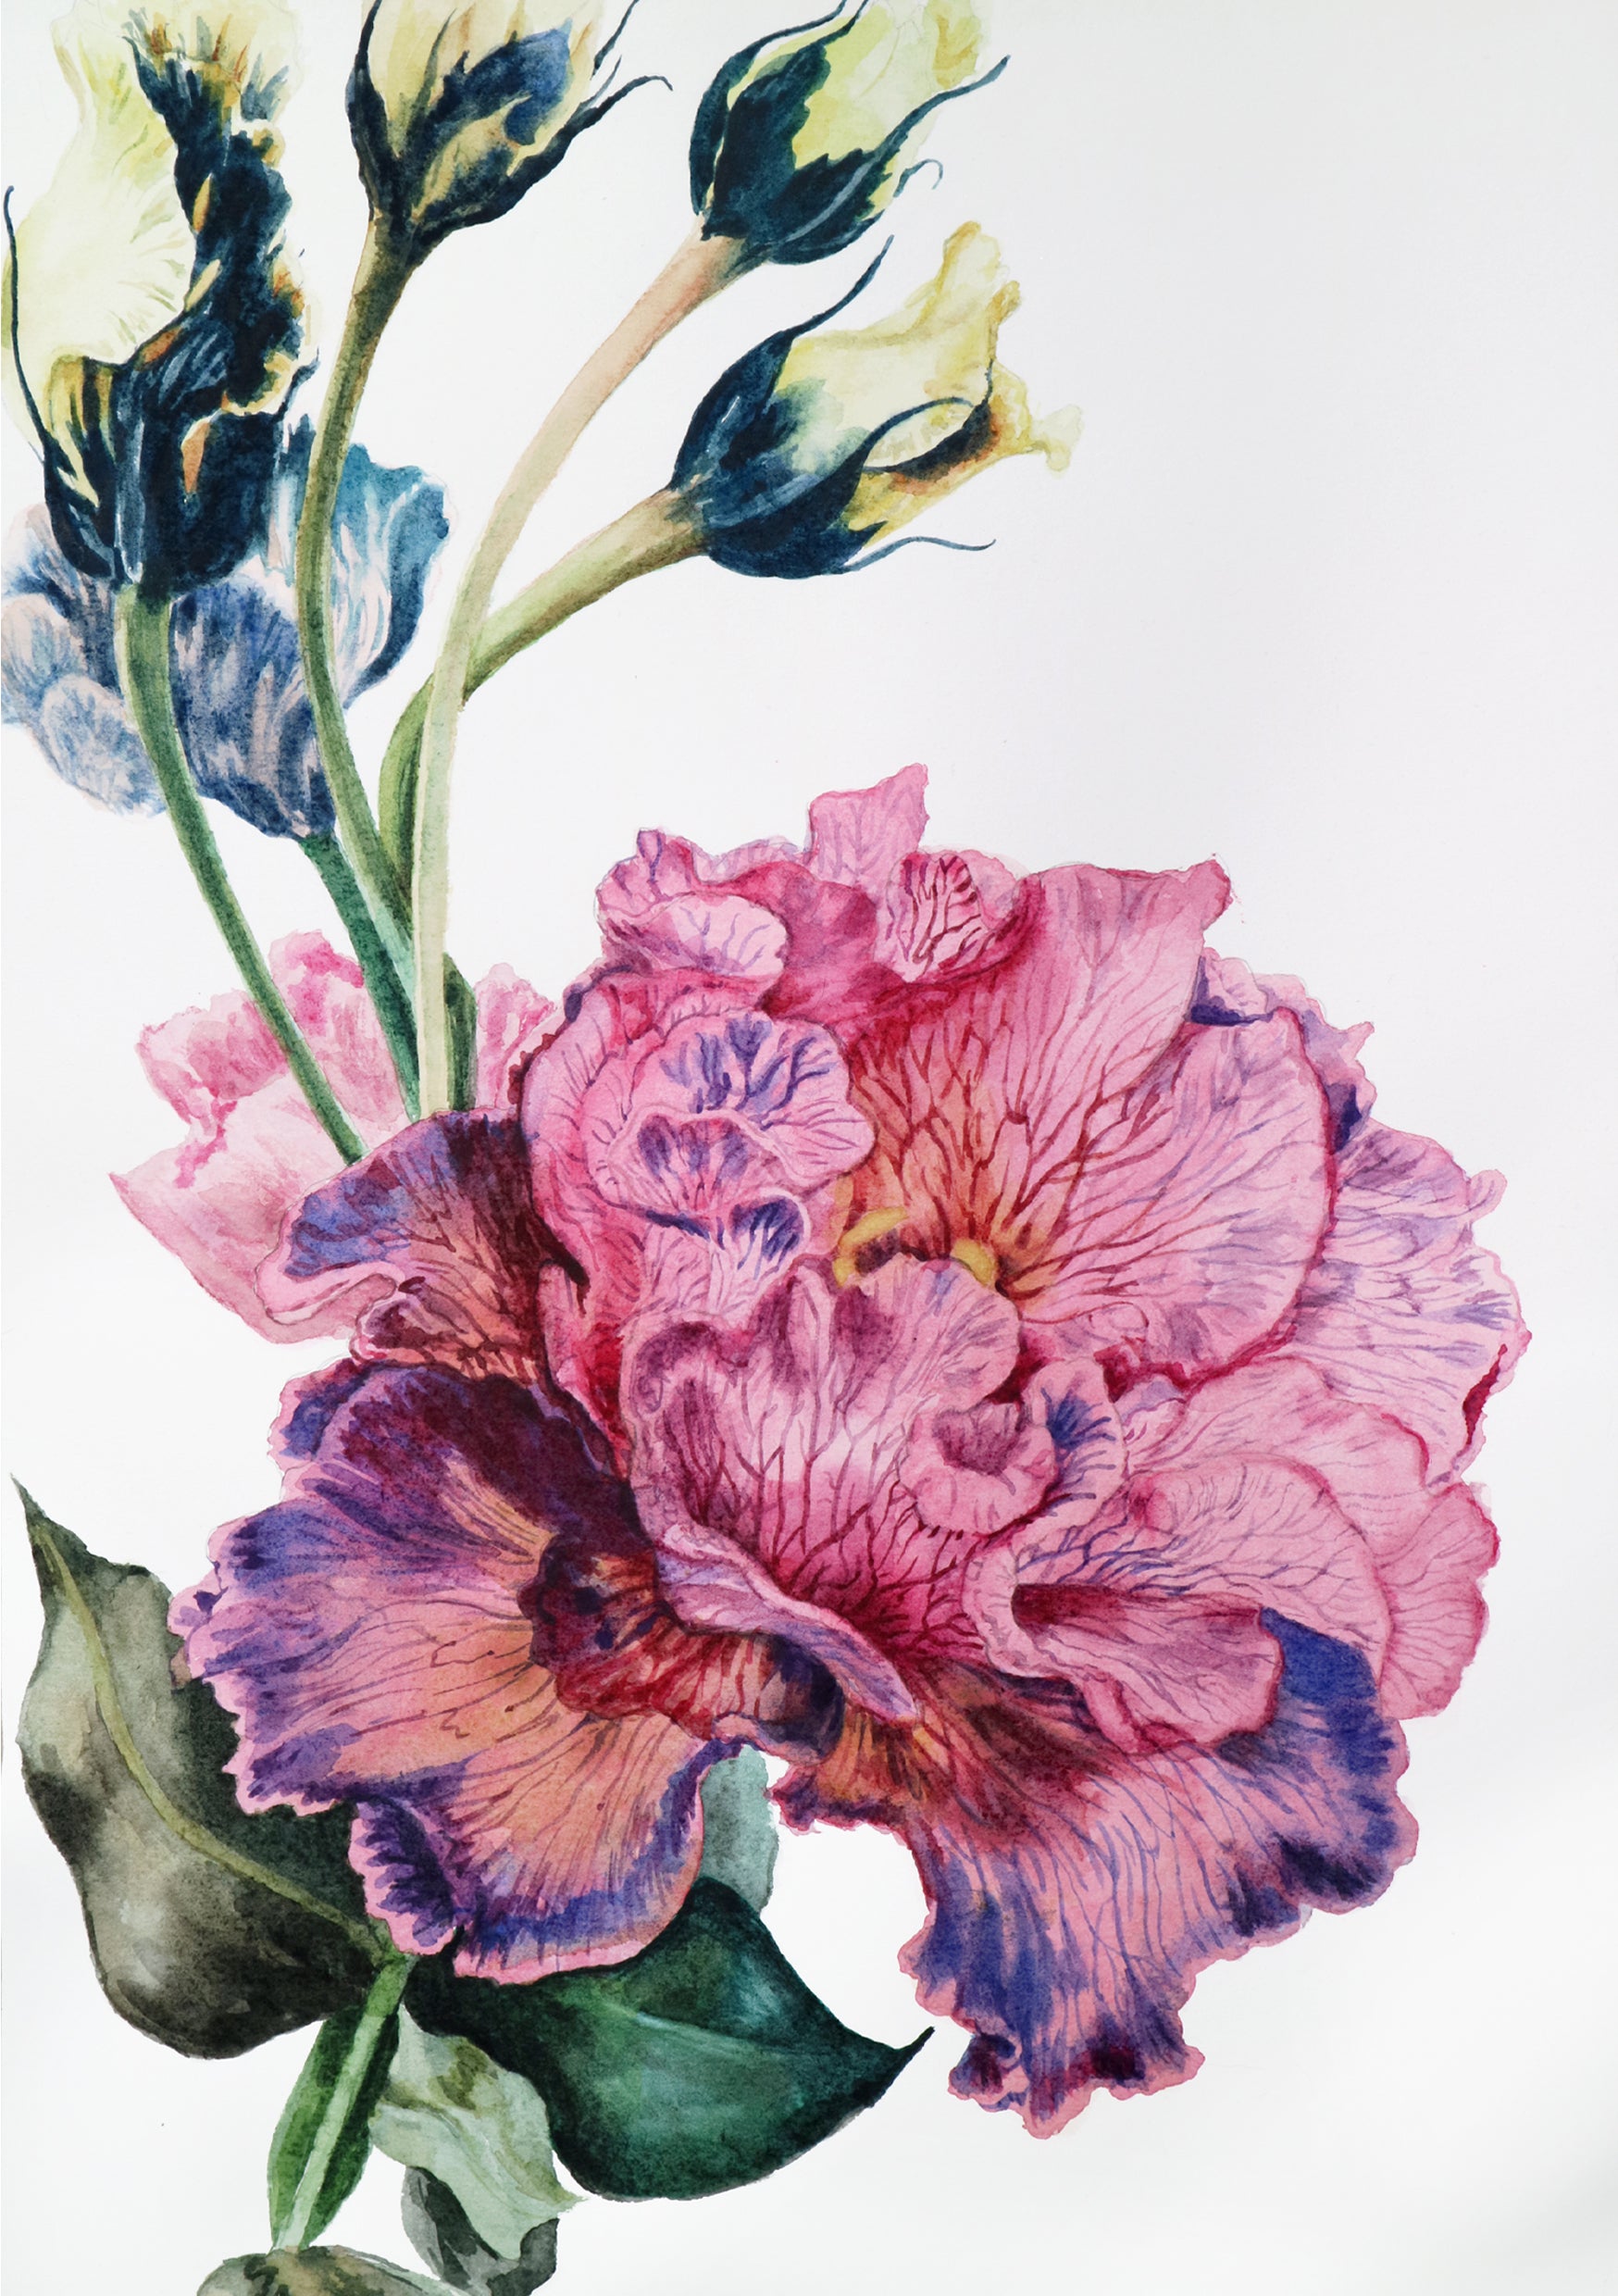 watercolour illustration of a lisianthus flower